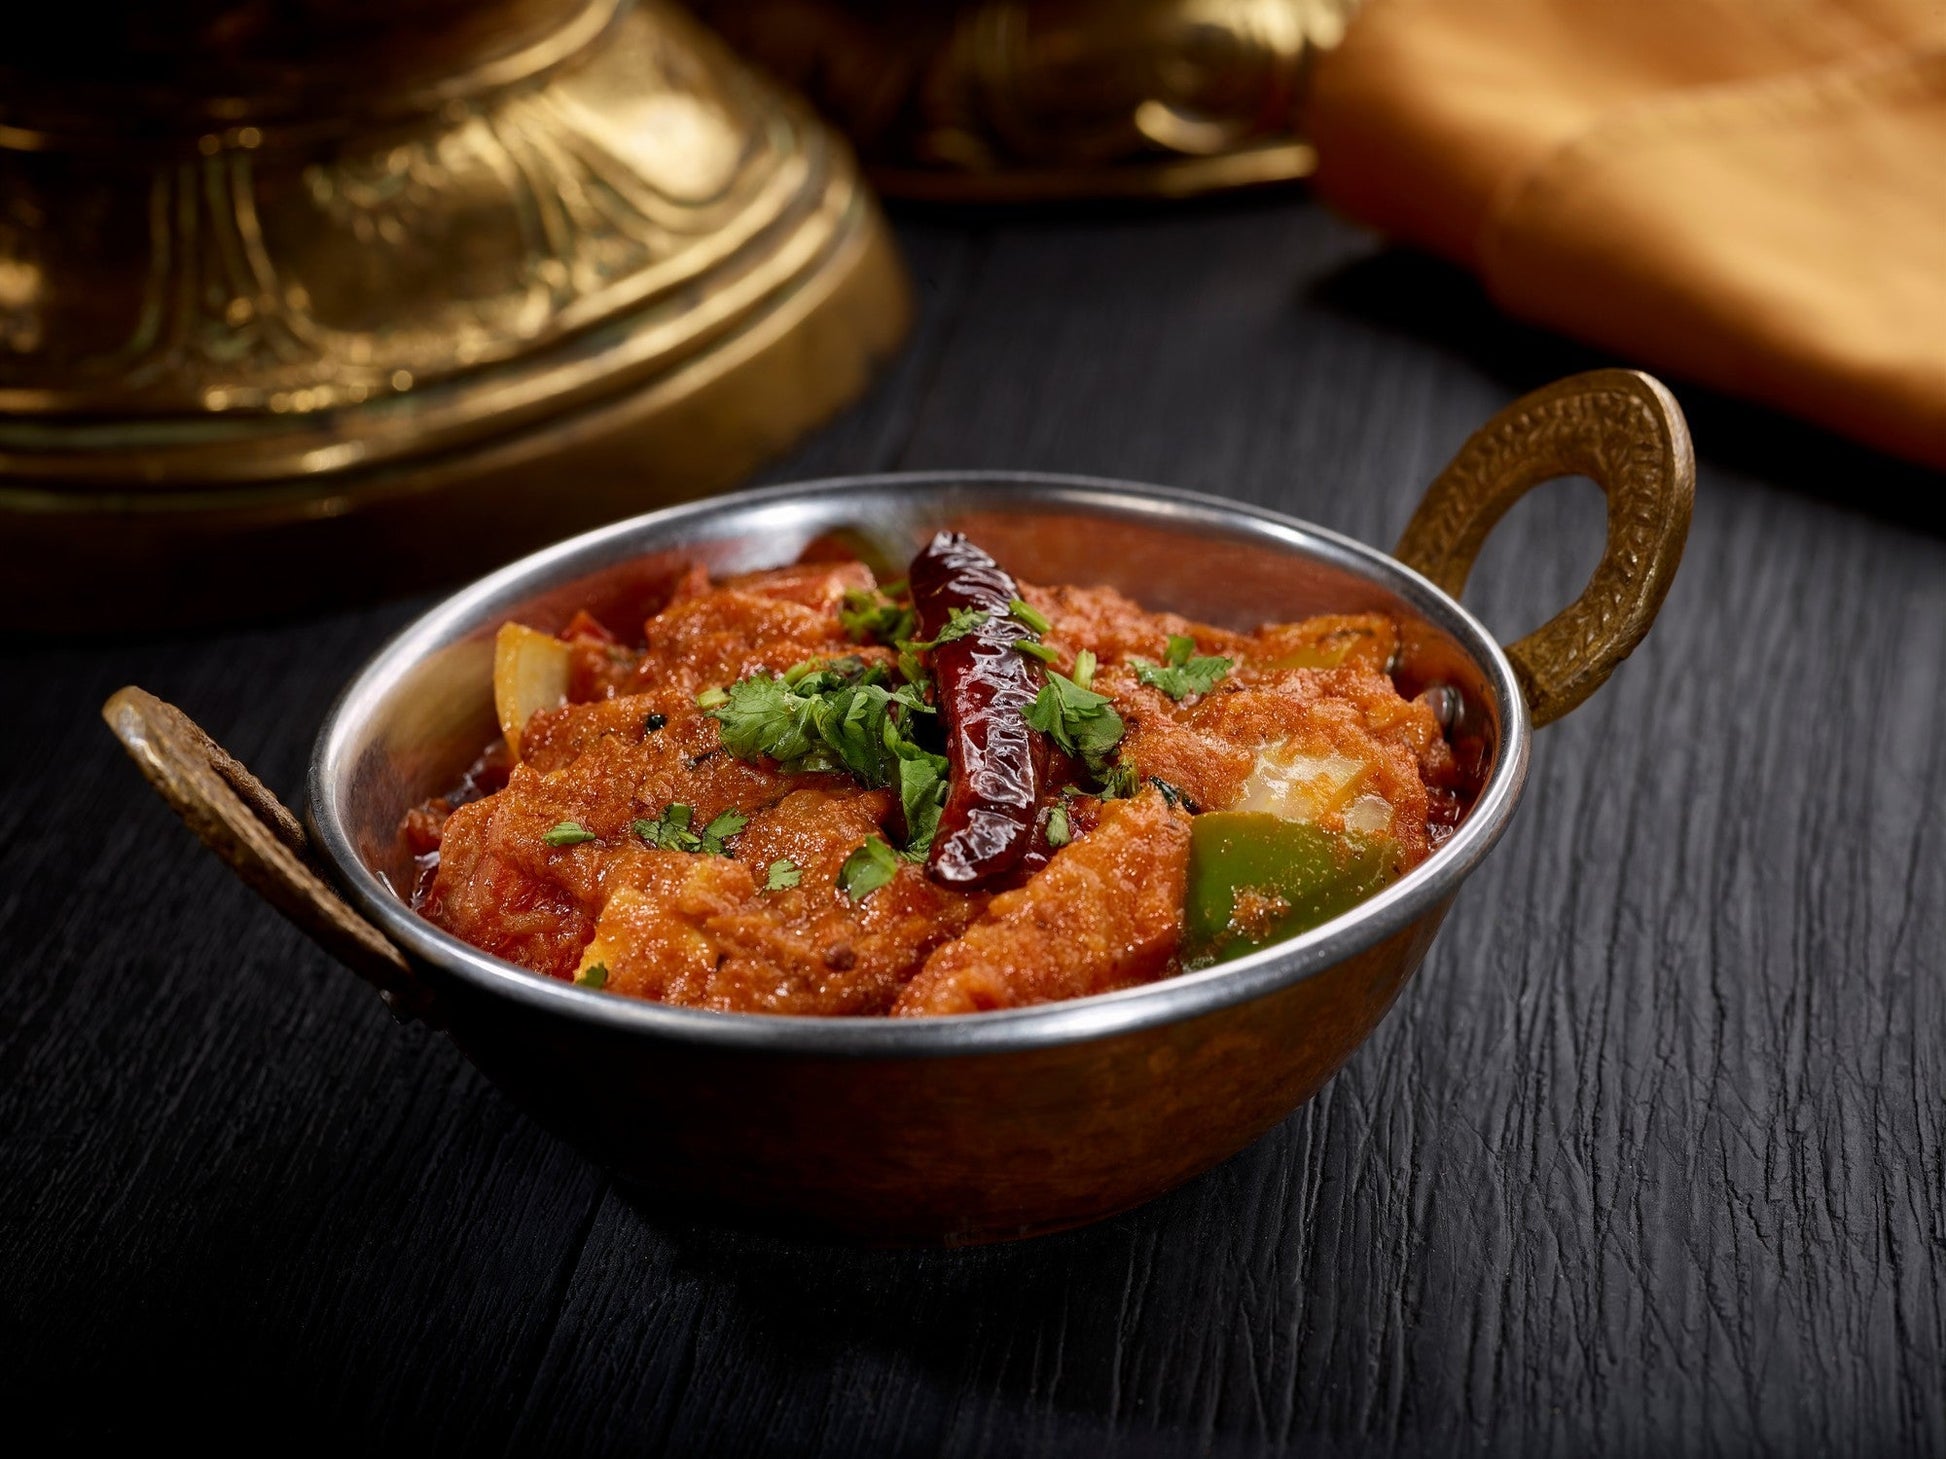 Flavorful Kadai dish, a rustic semi-dry gravy cooked with onions, tomatoes, bell peppers, and spices